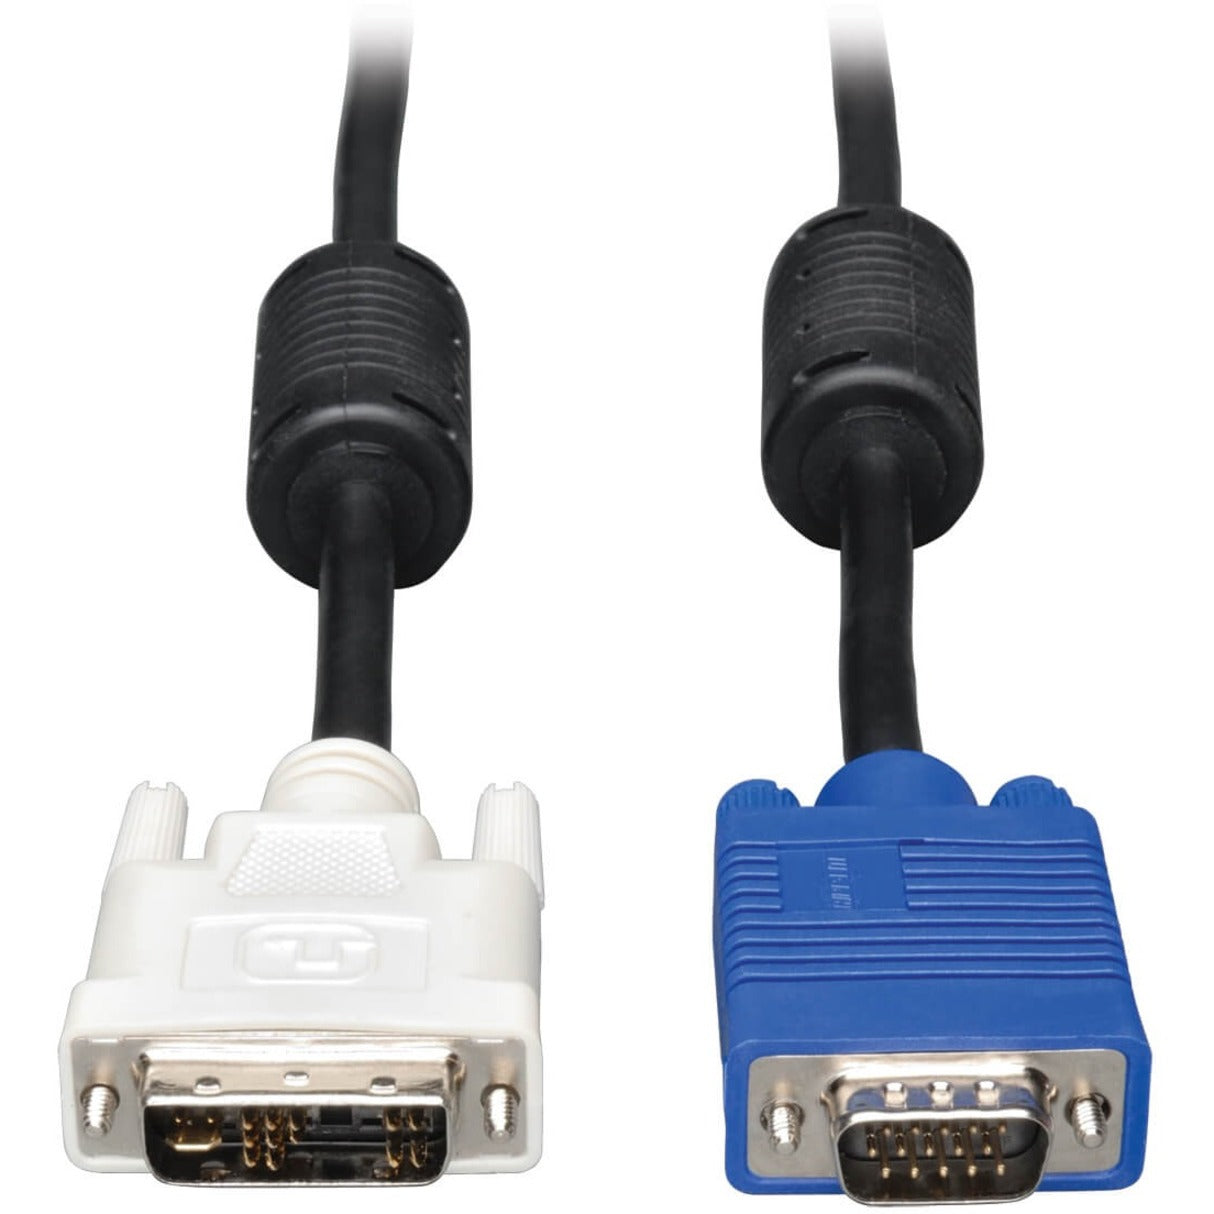 Tripp Lite P556-010 Coaxial DVI/VGA Cable, 10 ft, Molded, Strain Relief, EMI/RF Protection